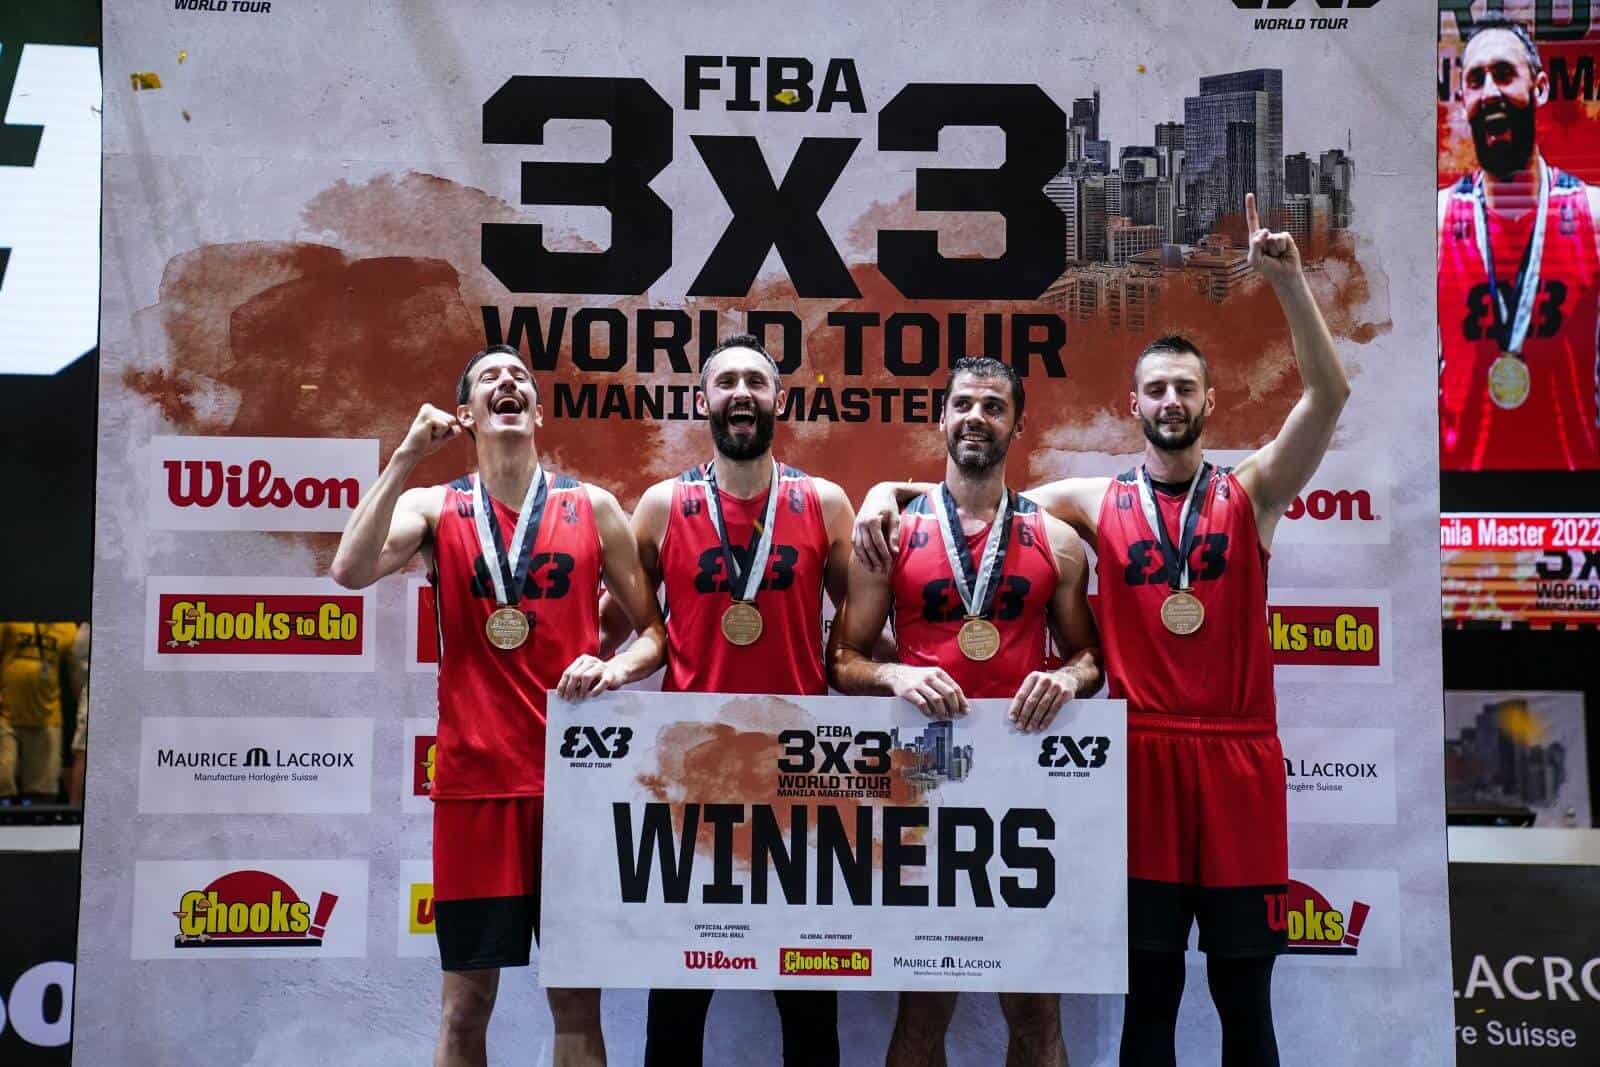 Fiba 3x world tour winners posing with their medals at the 2022 Chooks-to-Go FIBA 3x3 World Tour Manila Masters.